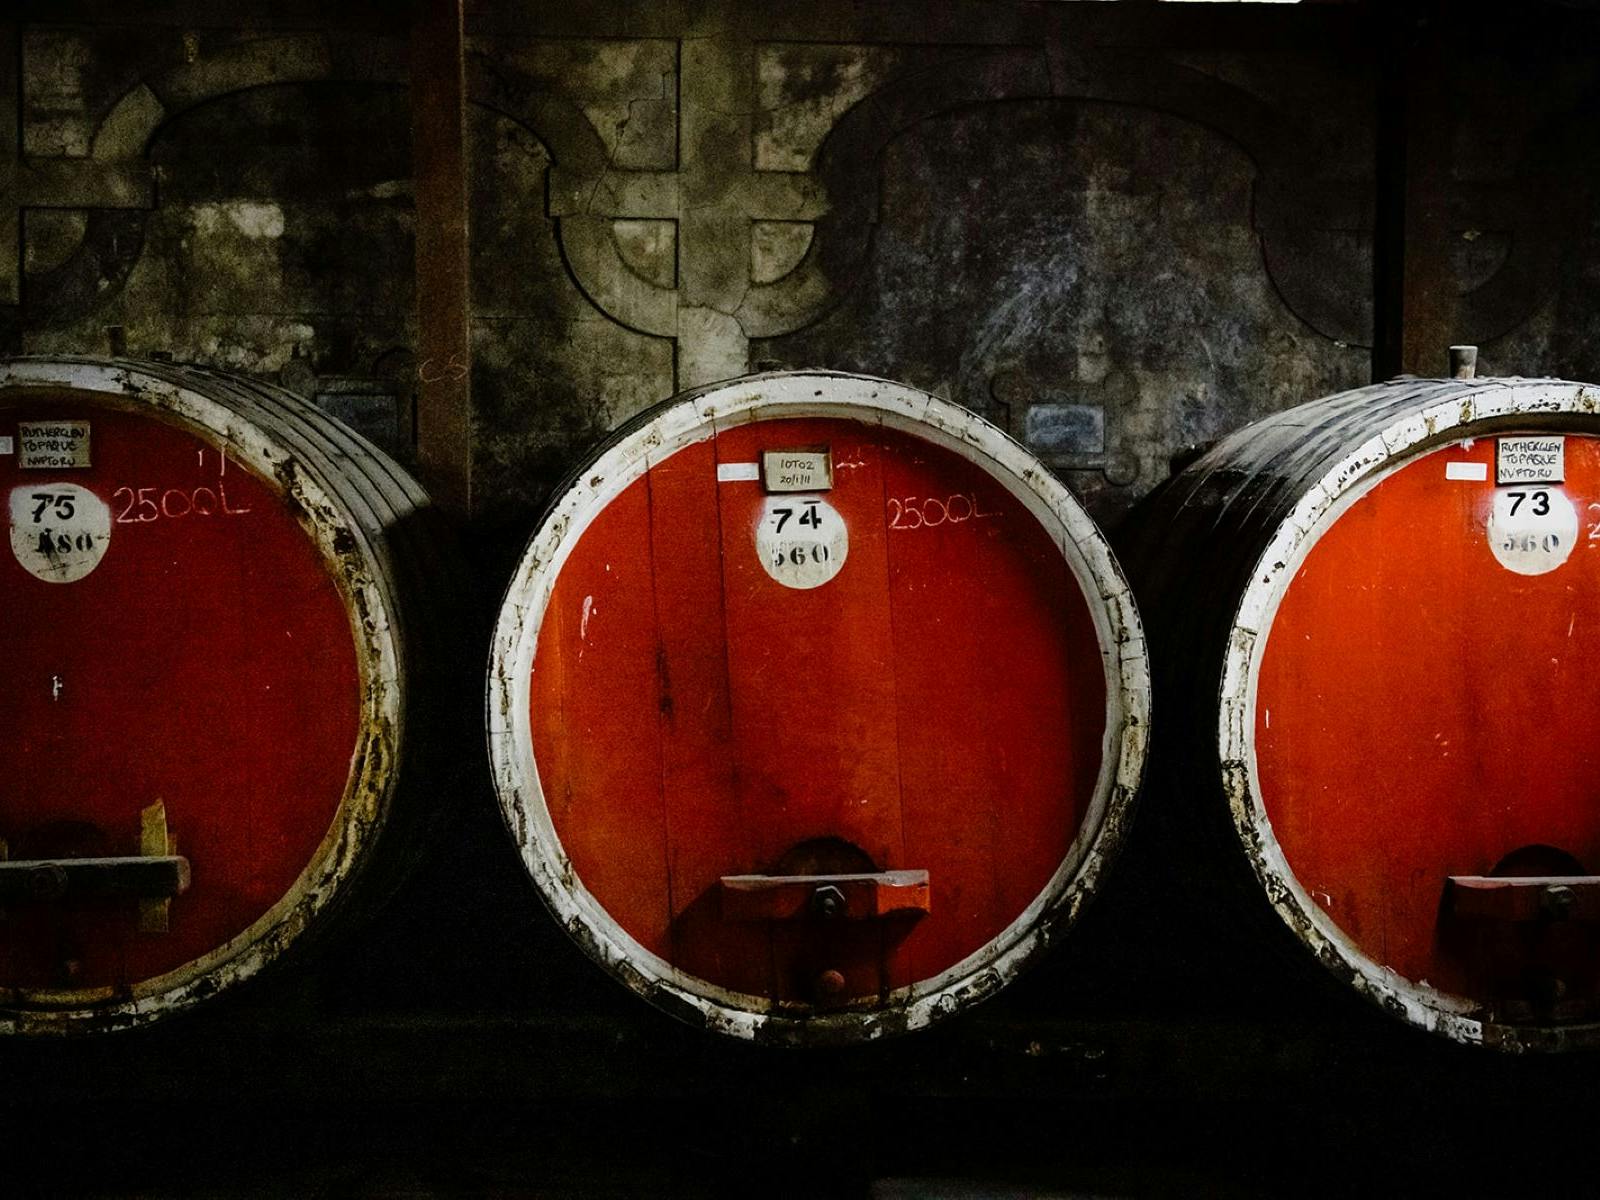 Take a tour through the old winery